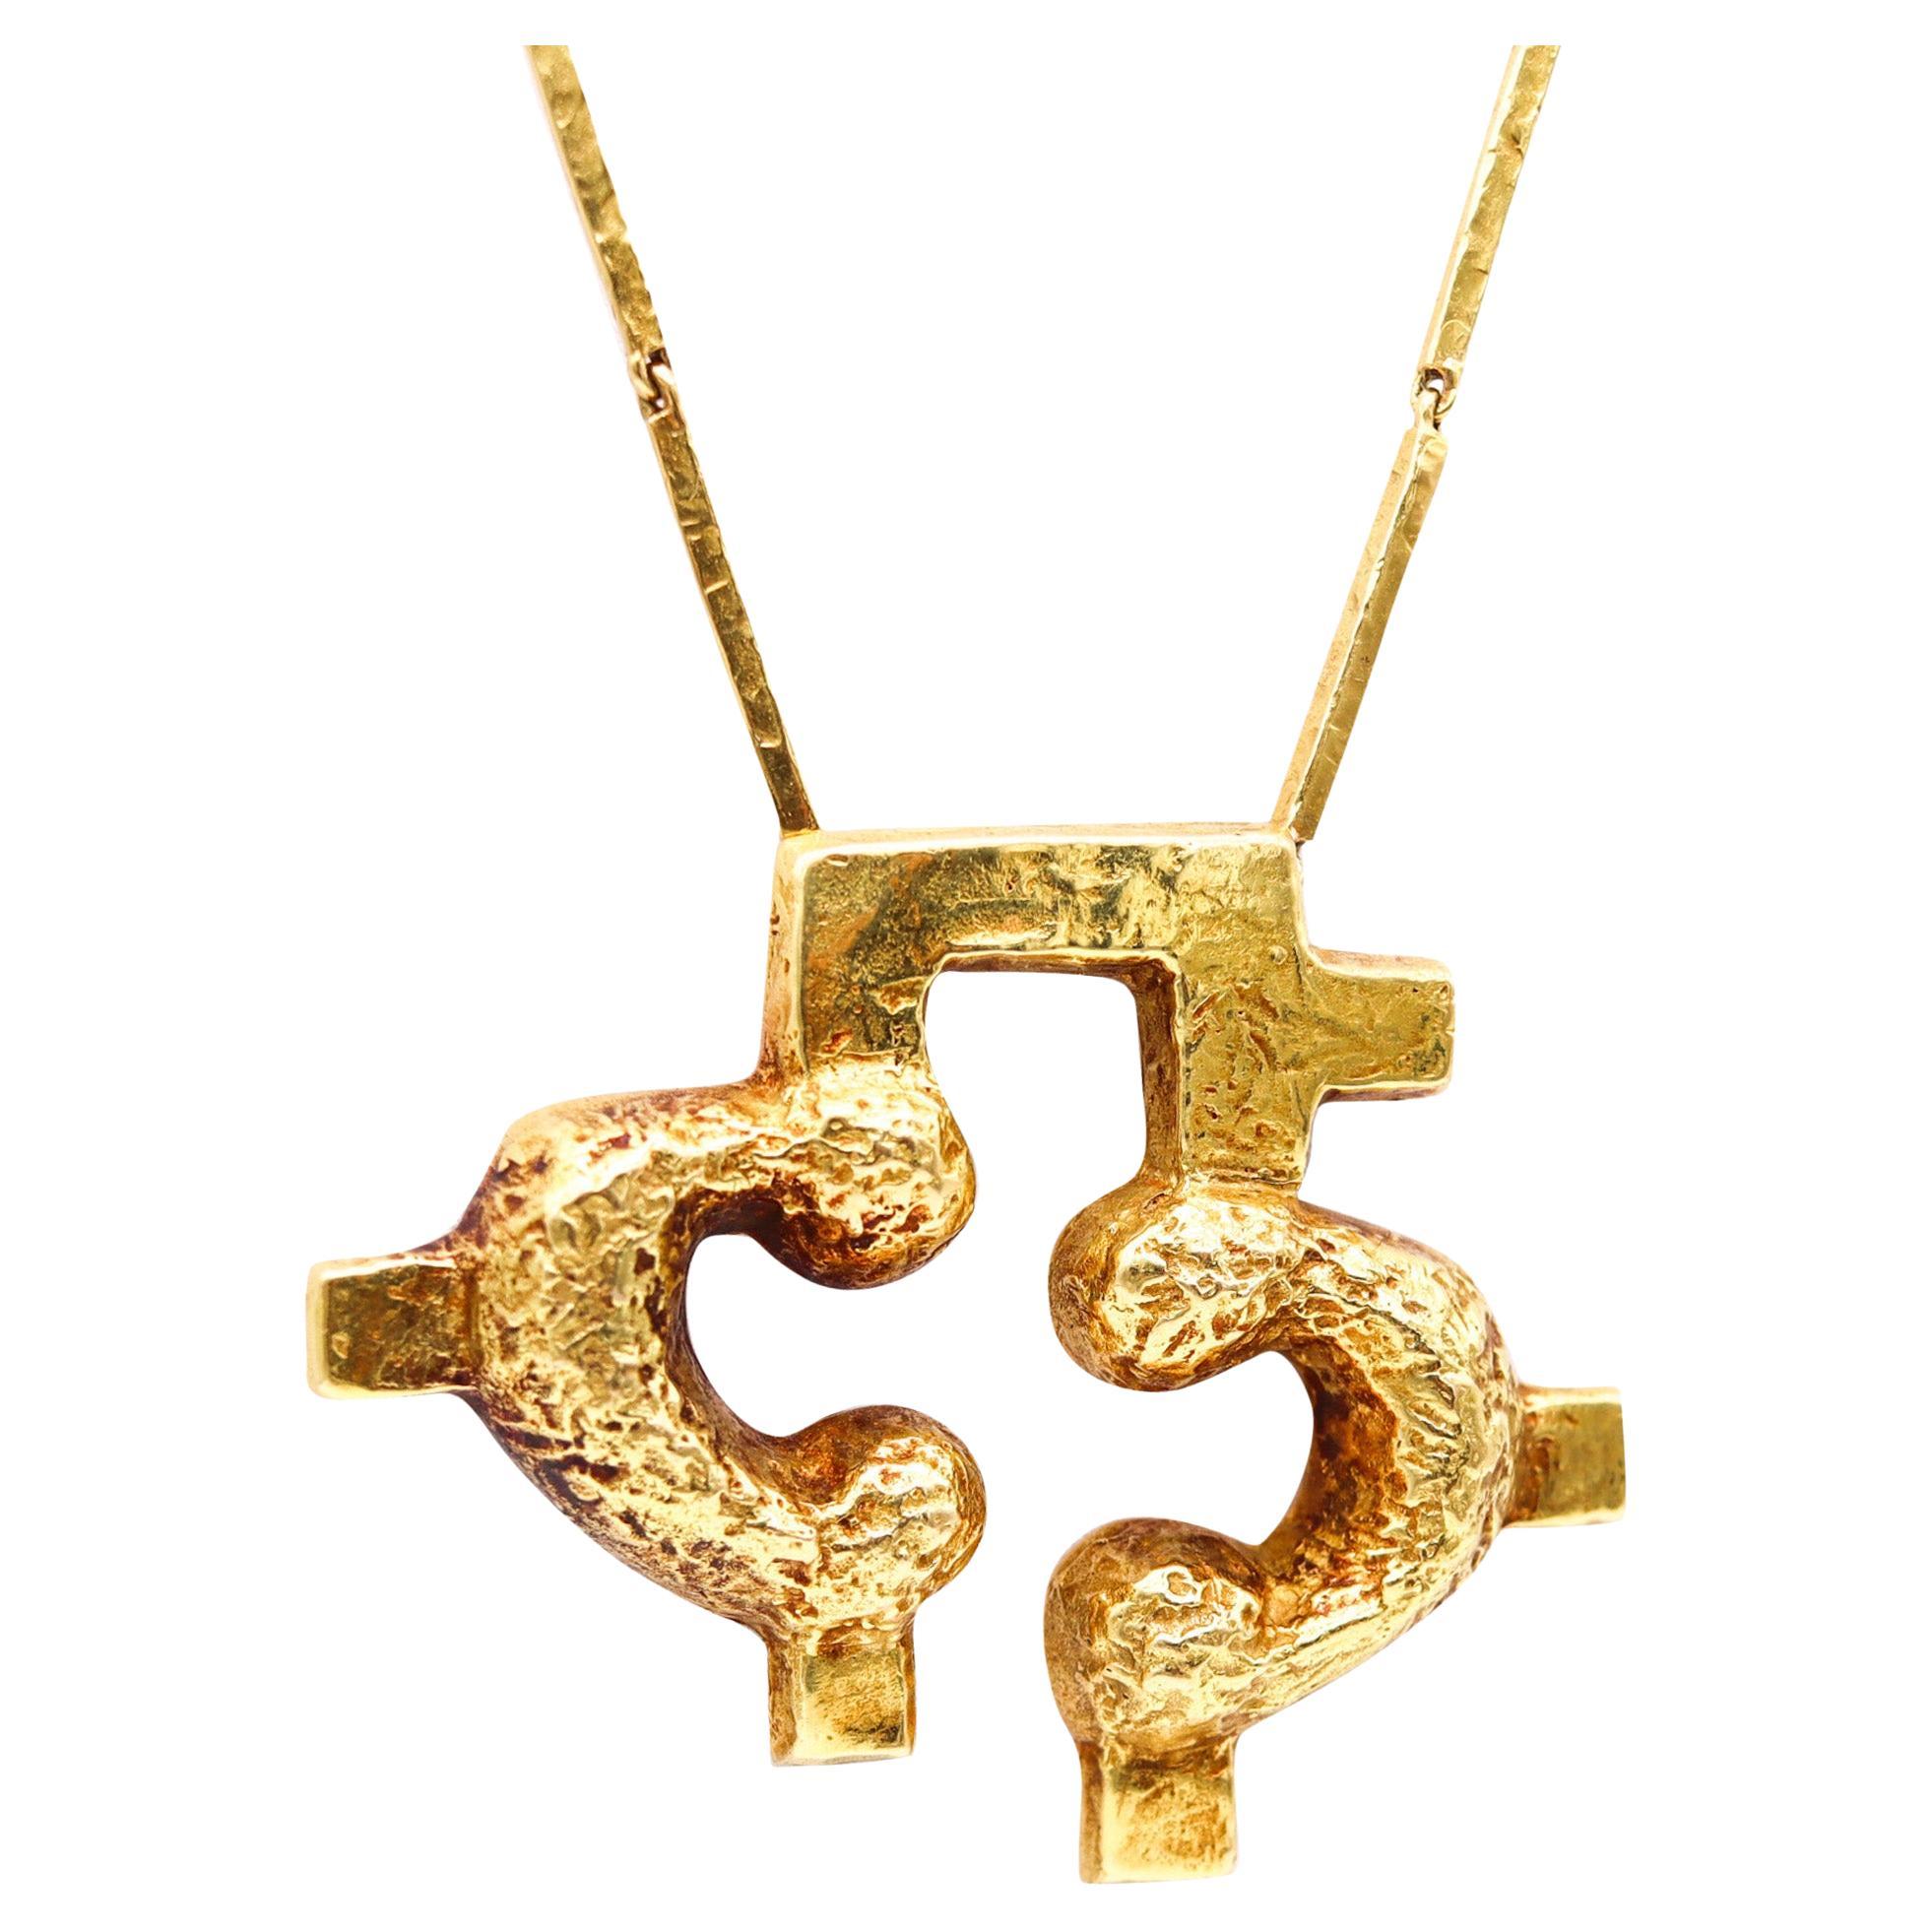 Liuba Wolf 1970 Concretism Sculptural Pendant Necklace Chain In 18Kt Yellow Gold For Sale